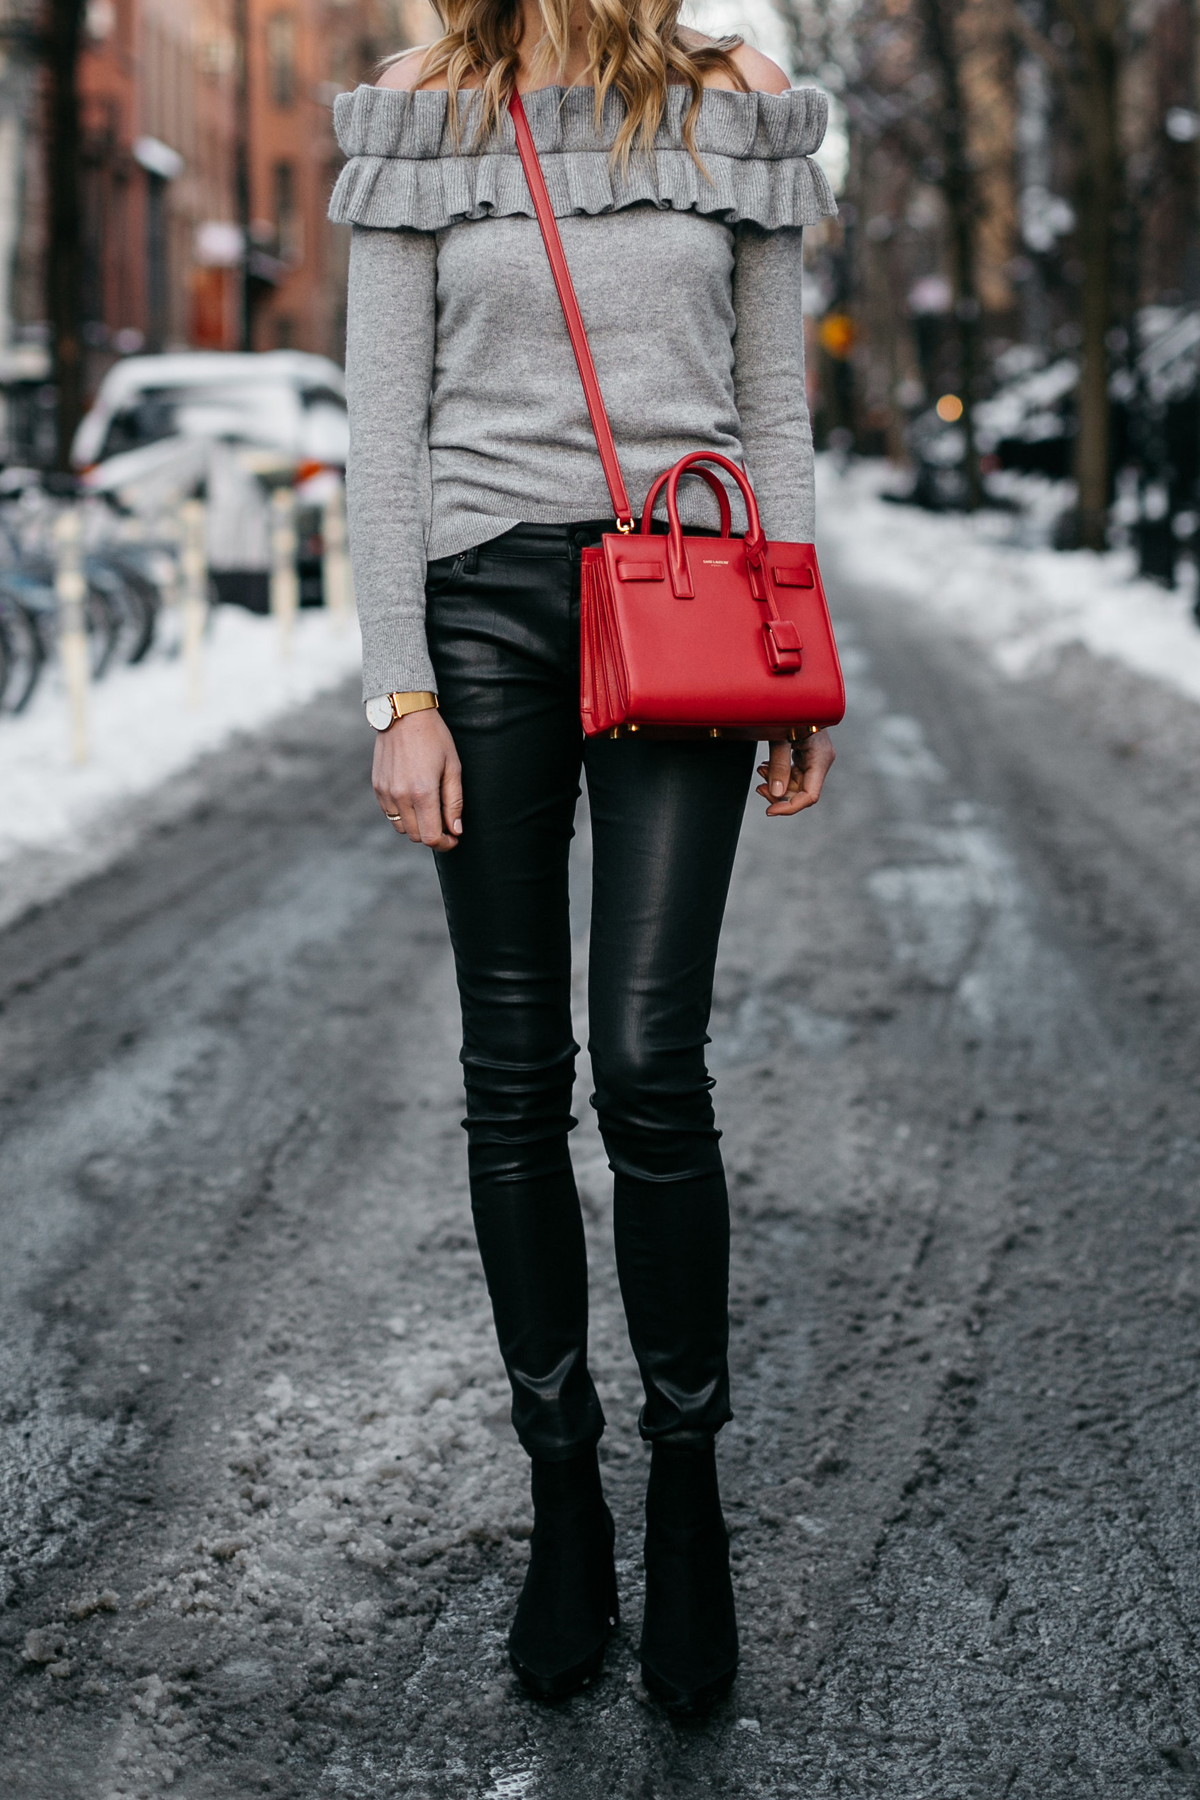 NYFW Fall/Winter 2017, Streetstyle, Club Monaco Grey Ruffle Off-the-Shoulder Sweater, Black Faux Leather Pants, Saint Laurent Sac de Jour Red, Black Ankle Booties